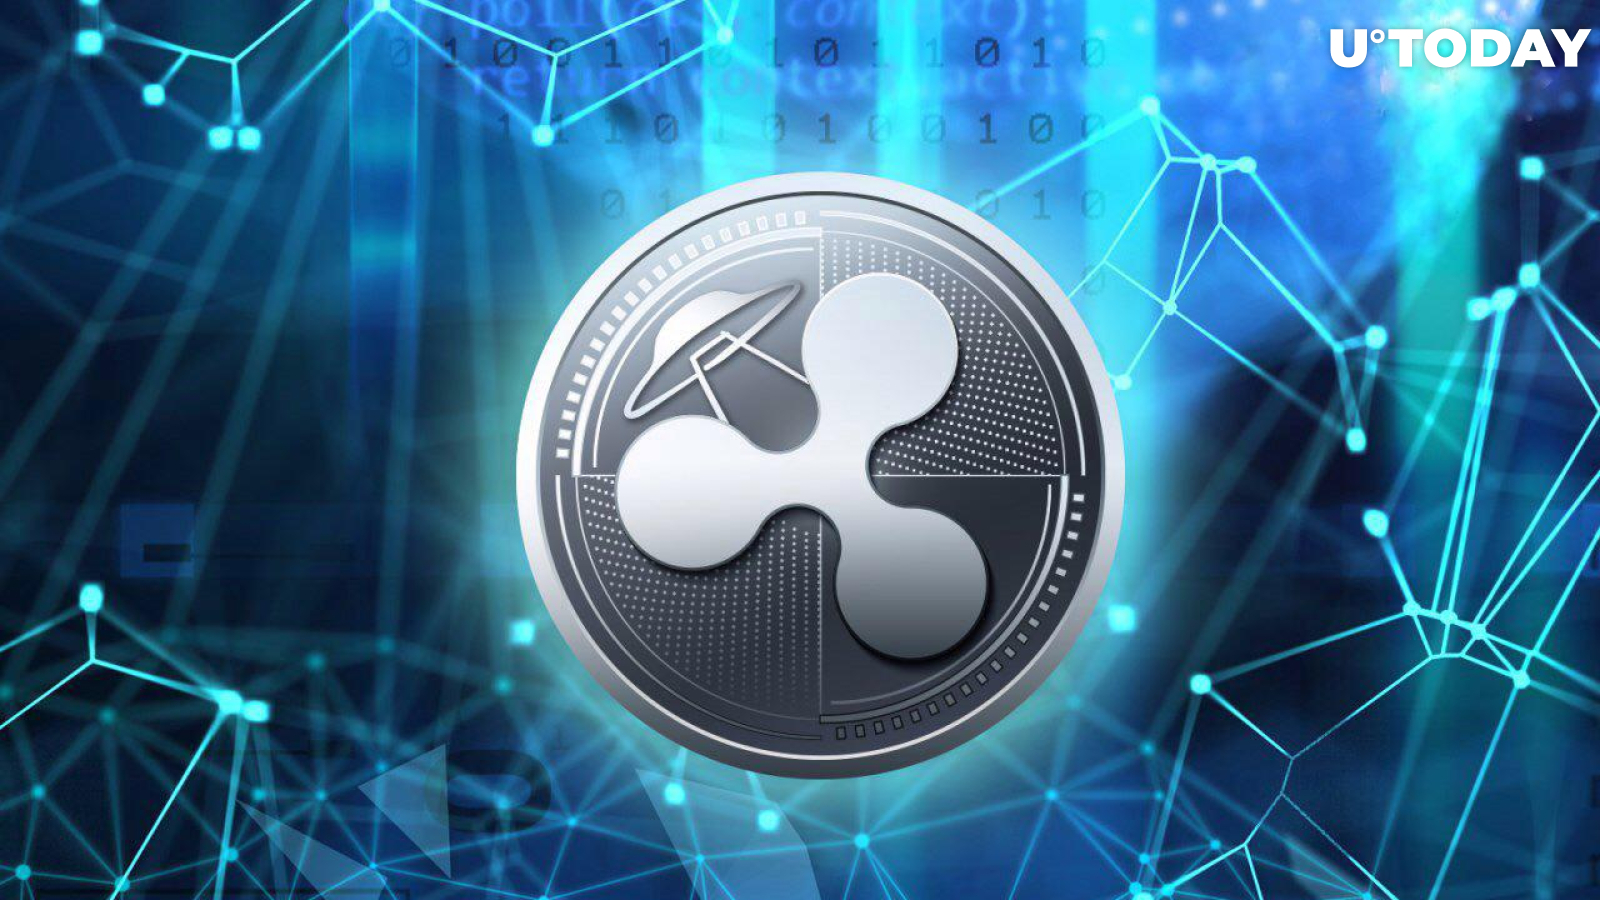 Ripple Keeps Supporting Global DLT Adoption, Donates $100 Mln to “Ripple for Good” Social Program